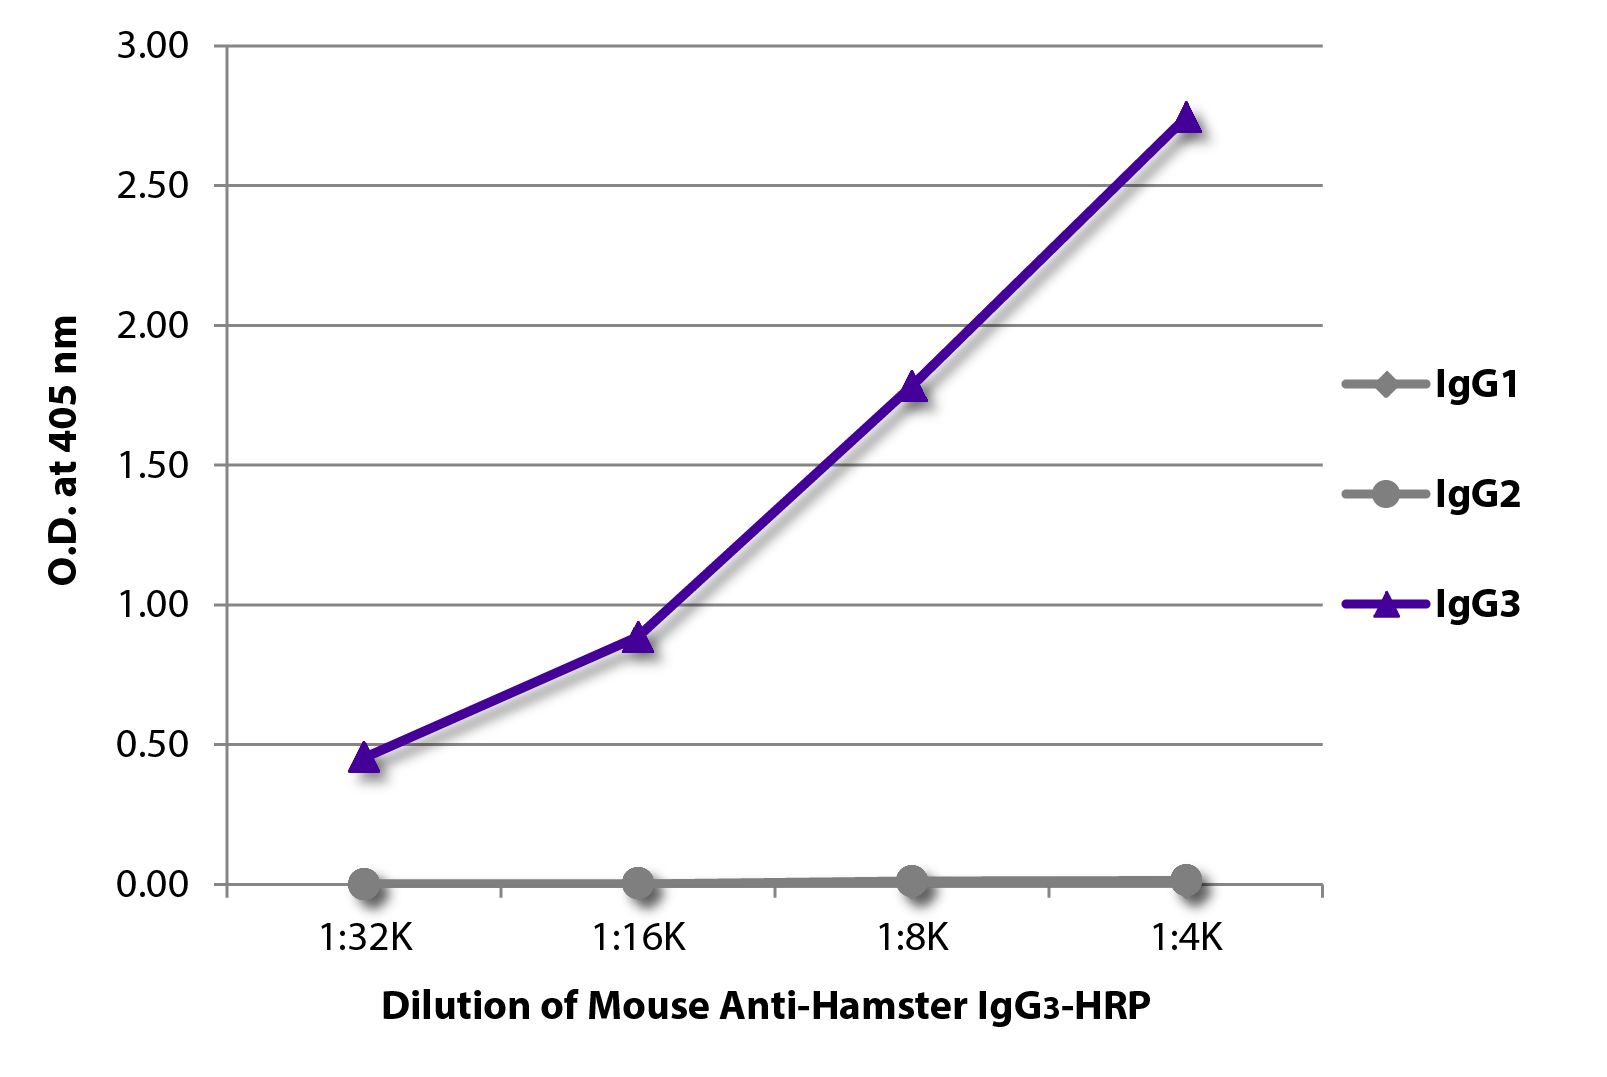 ELISA plate was coated with purified hamster IgG<sub>1</sub>, IgG<sub>2</sub>, and IgG<sub>3</sub>.  Immunoglobulins were detected with serially diluted Mouse Anti-Hamster IgG<sub>3</sub>-HRP (SB Cat. No. 1930-05).